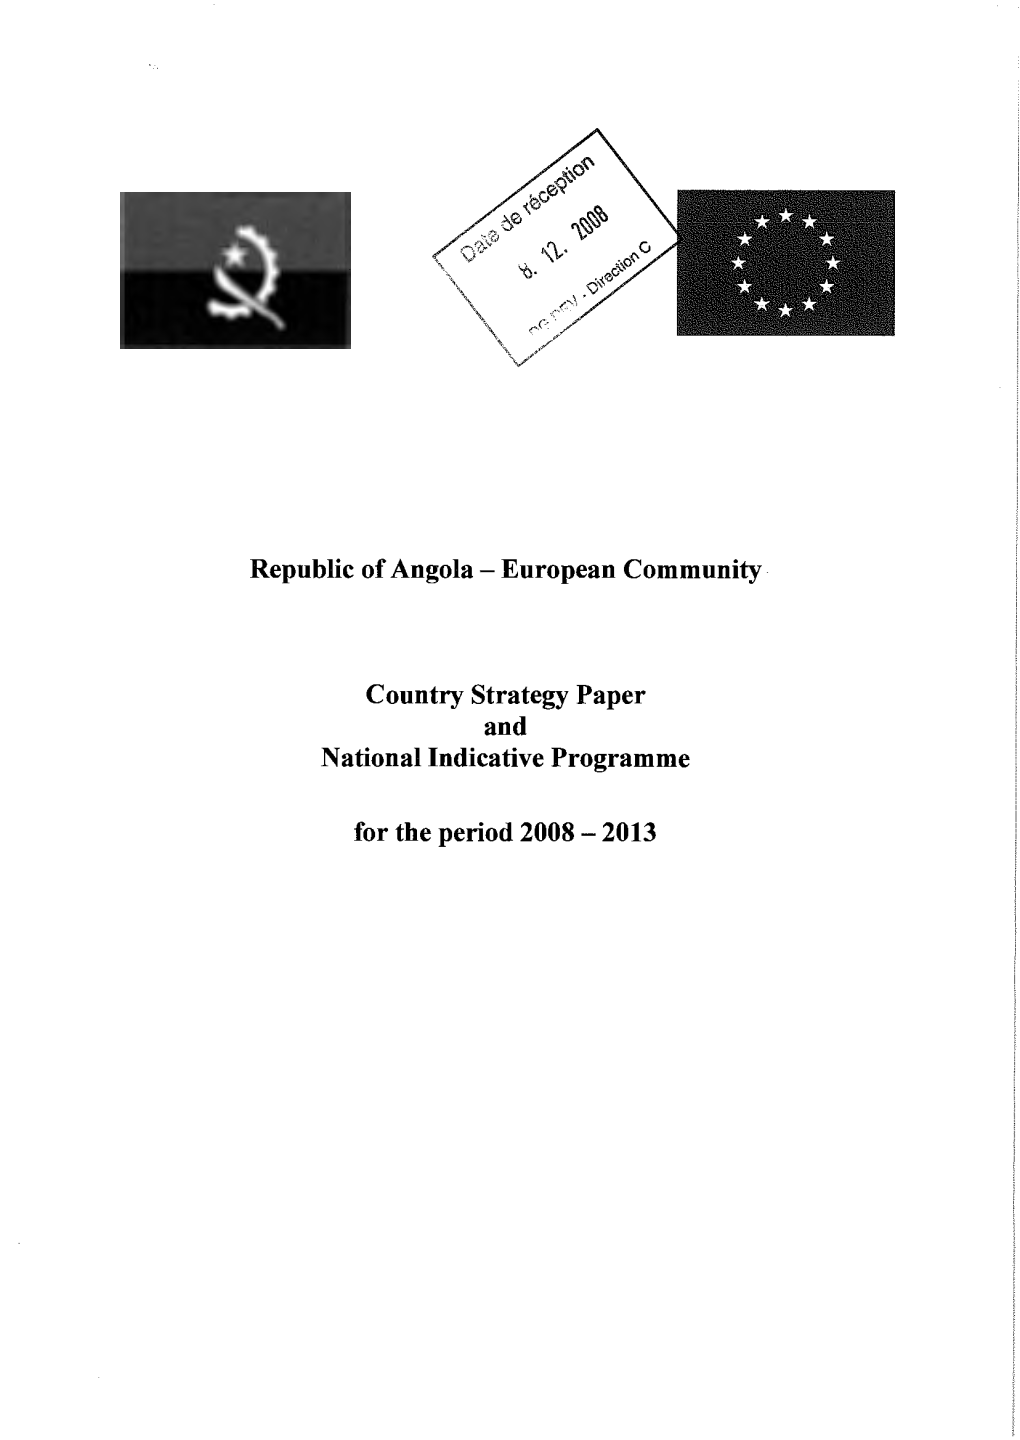 Republic of Angola- European Community Country Strategy Paper